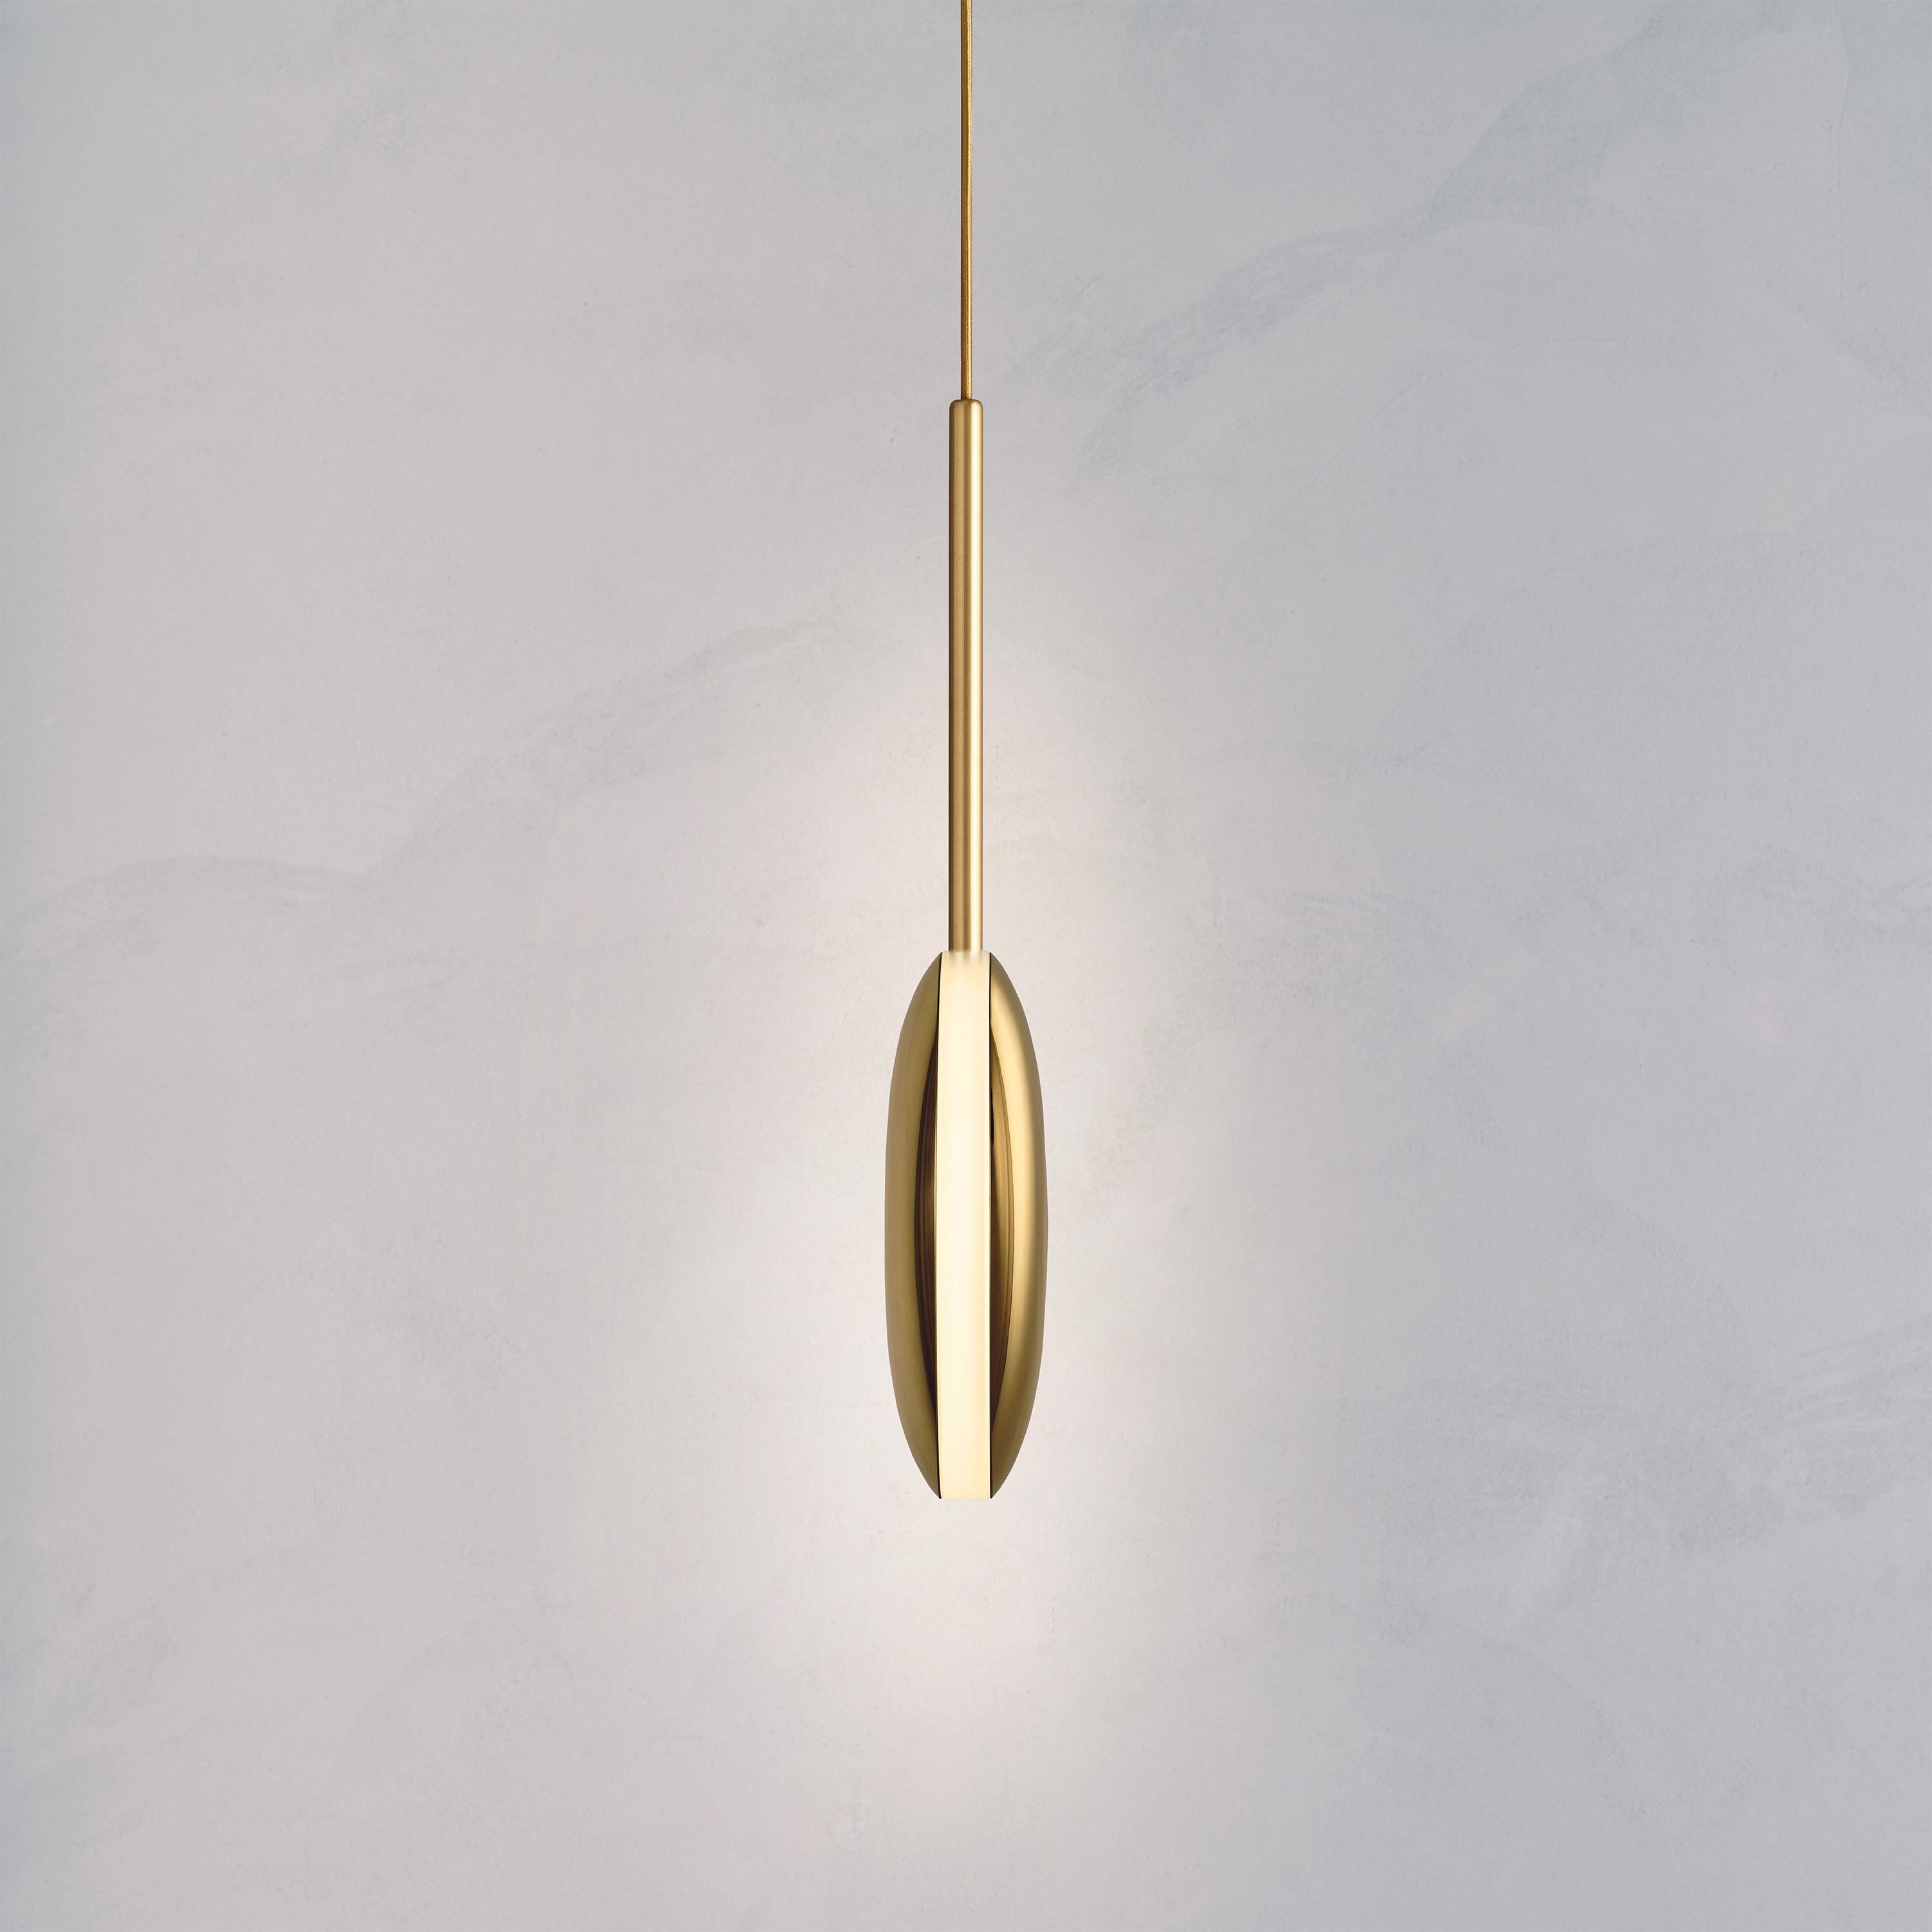 Cosmic 'Comet Pendant Aurum' Handmade High Polished Brass Ceiling Light In New Condition For Sale In London, GB